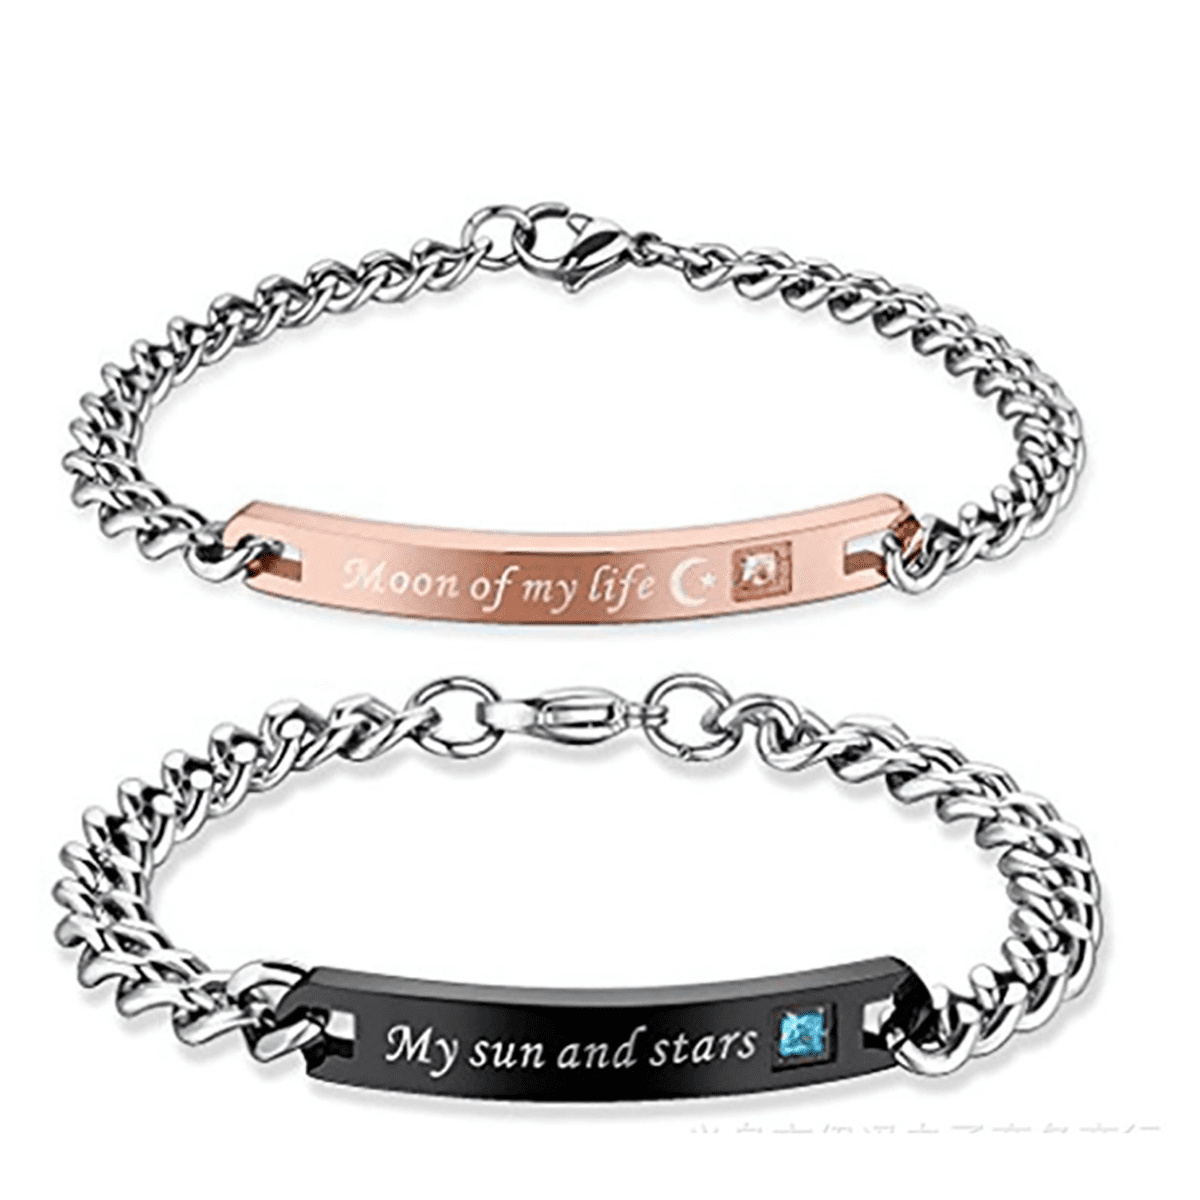 SXNK7 Gift for Lover His Queen Her King Stainless Steel Couple Bracelets  for Women Men Jewelry Matching Set